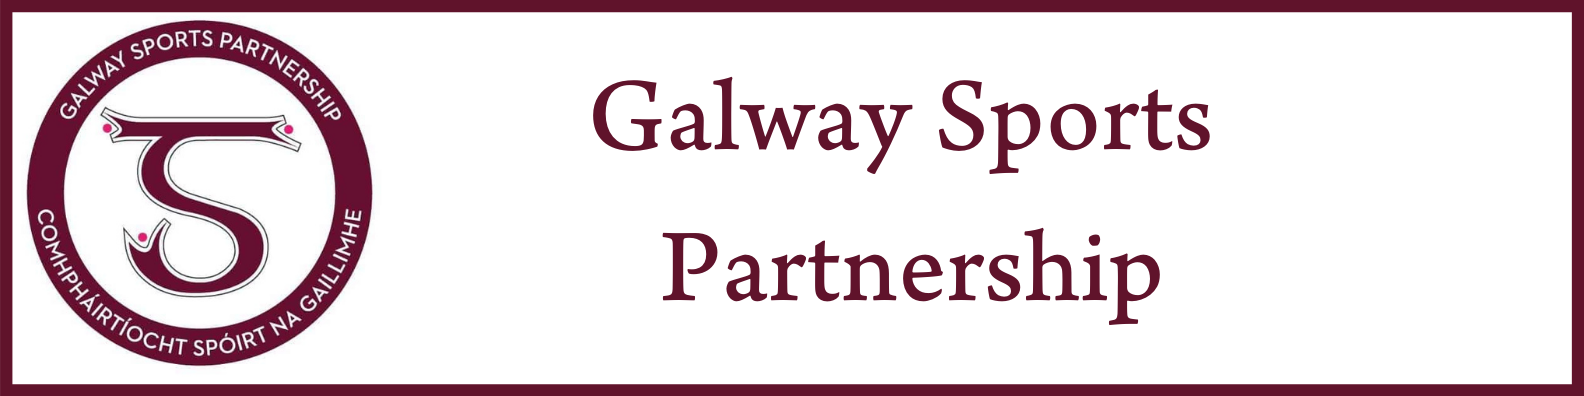 Galway Sports Partnership Banner